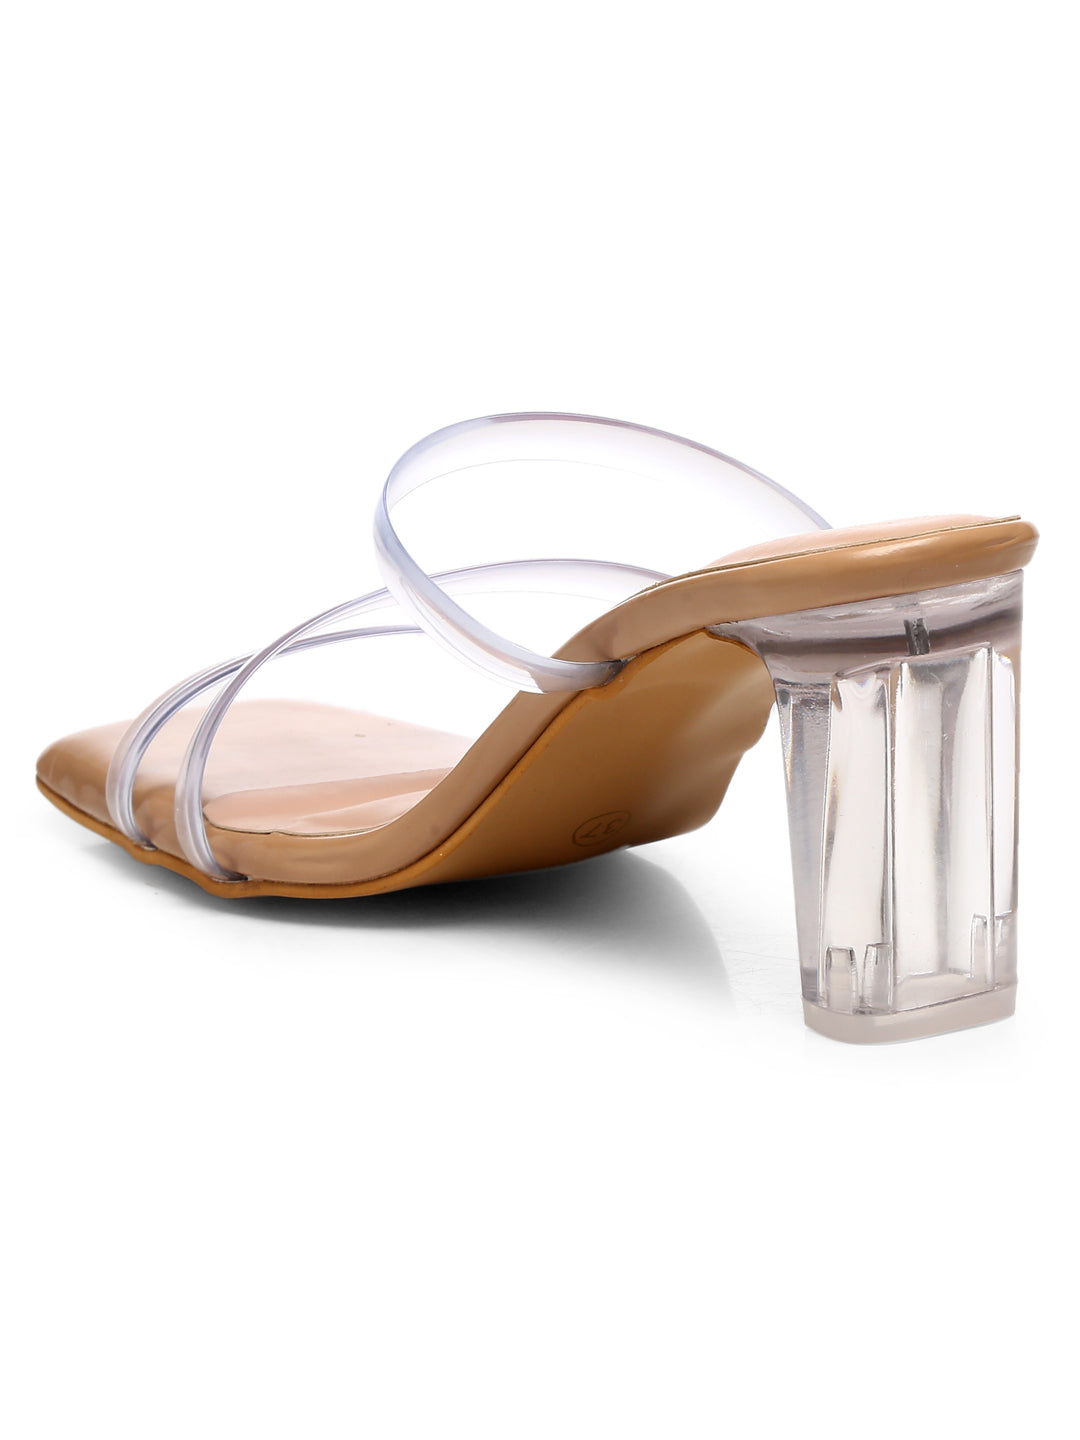 Windsor Clearly On Trend Lucite Block Heels | Size: 5.5 | Heels, Clear  block heels, Block heels